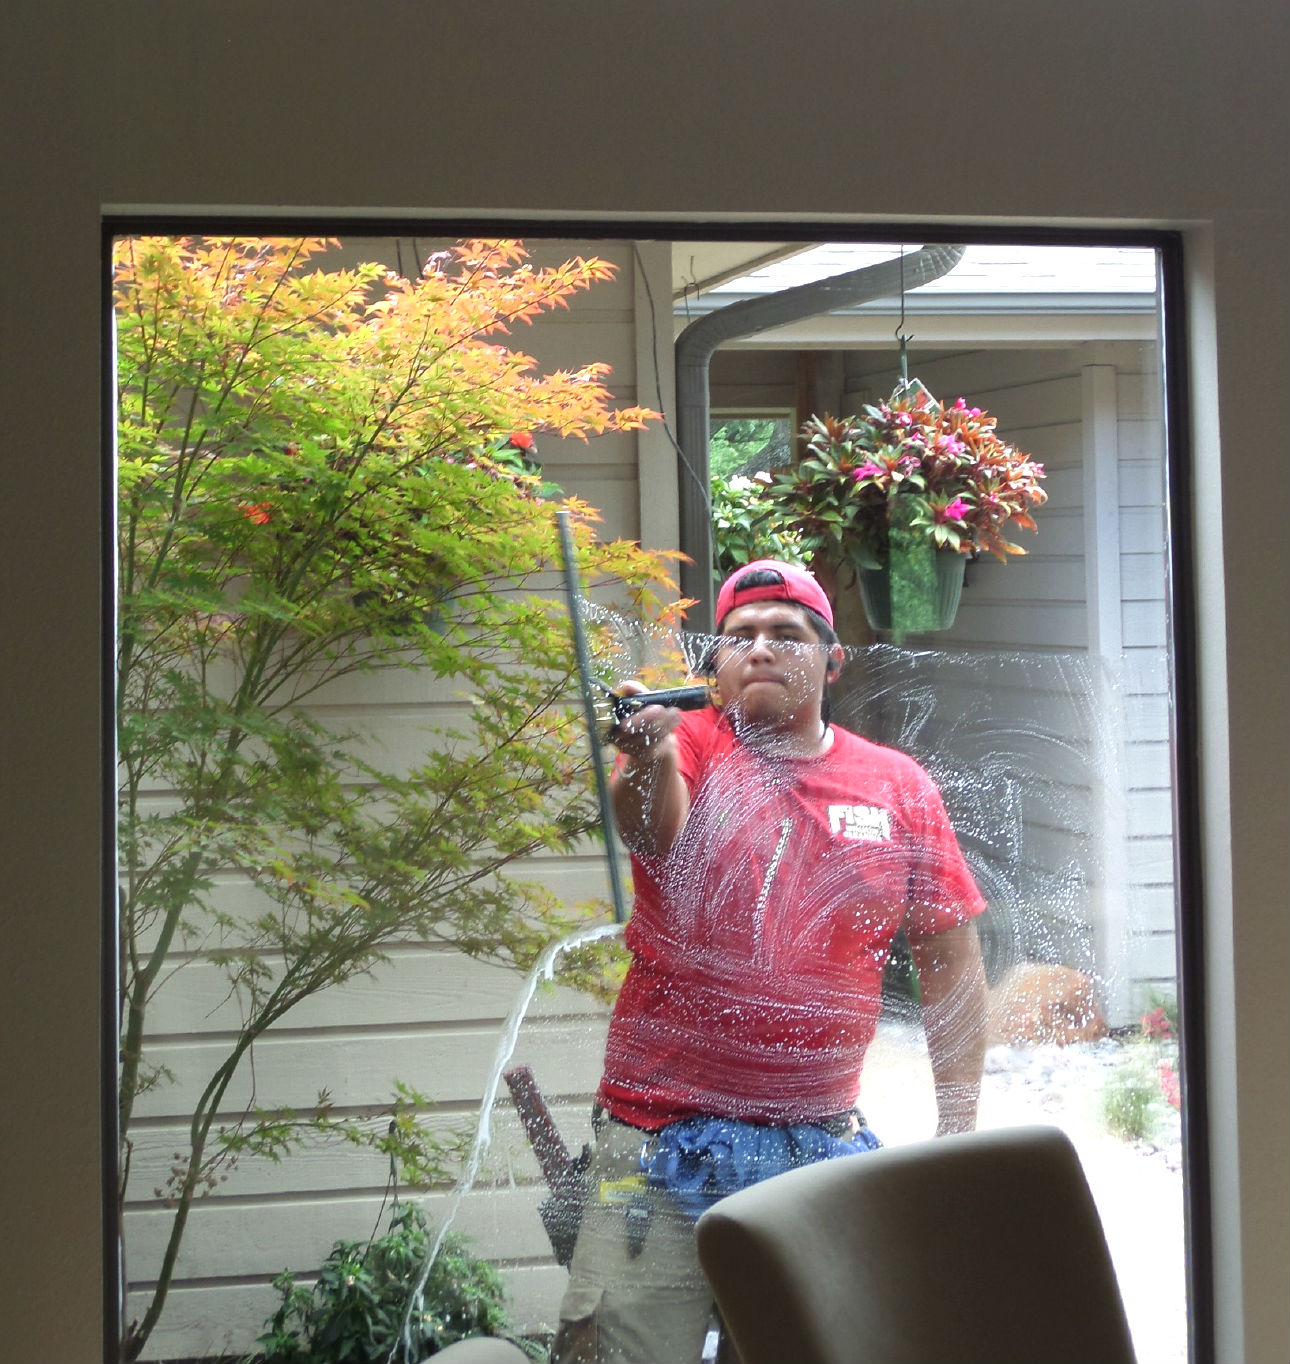 Image of FISH Window Cleaner Cleaning Residential Window